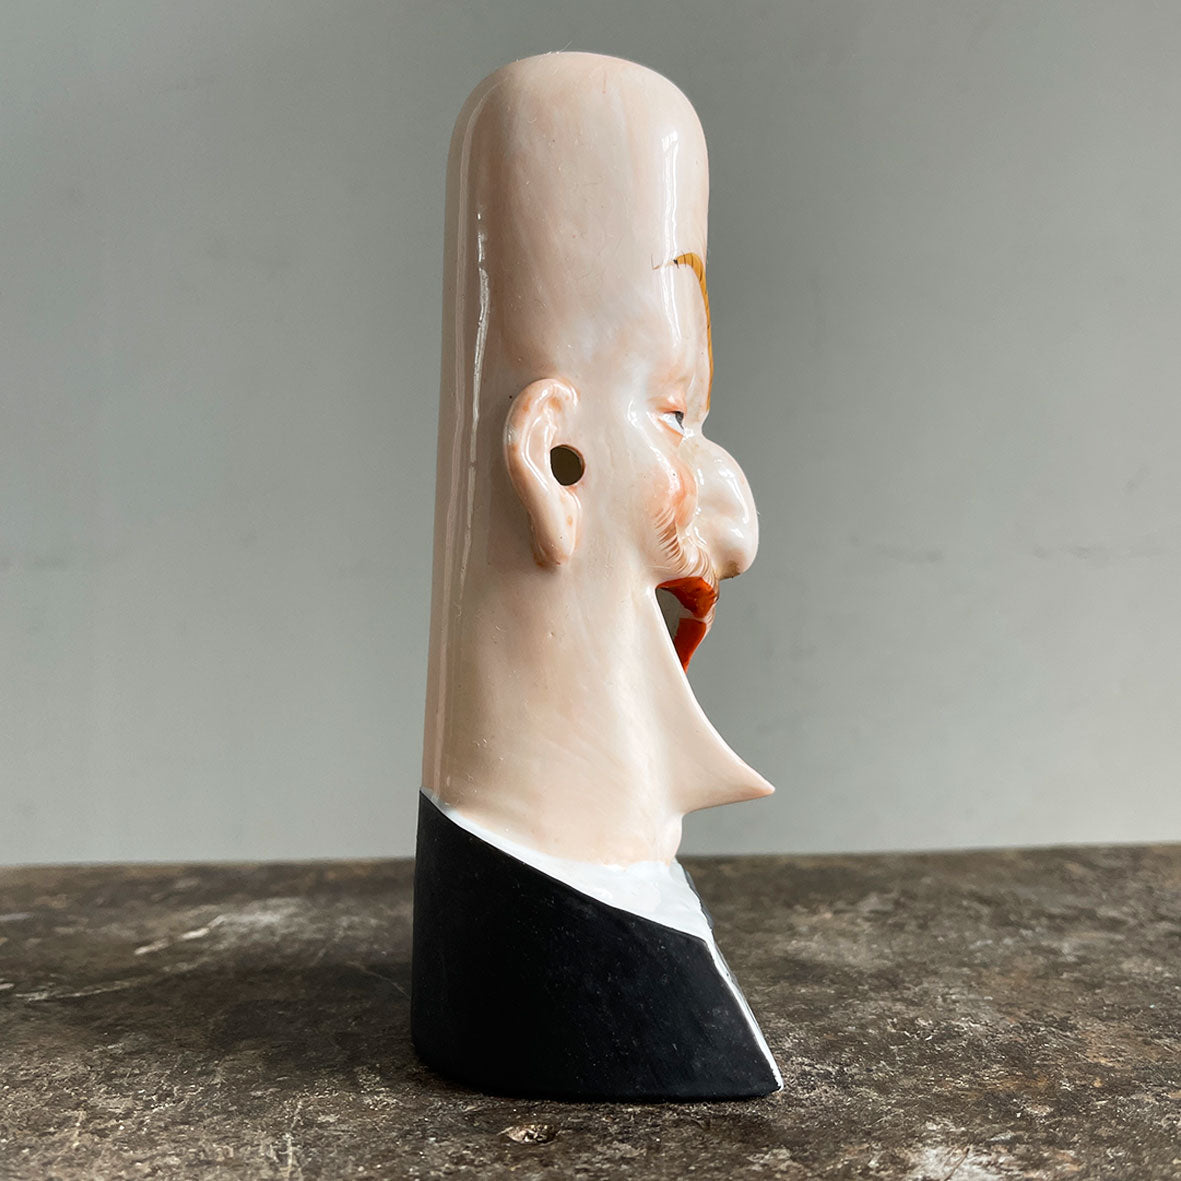 A rare German Porcelain Smoking Ashtray by Schafer &amp; Vater. These unusual objects were used as ashtrays with the smoke of the cigarette escaping through the ear holes. This one sees an old ugly chap with a monocle and a title that reads 'For He's a jolly good fellow - SHOP NOW - www.intovintage.co.uk